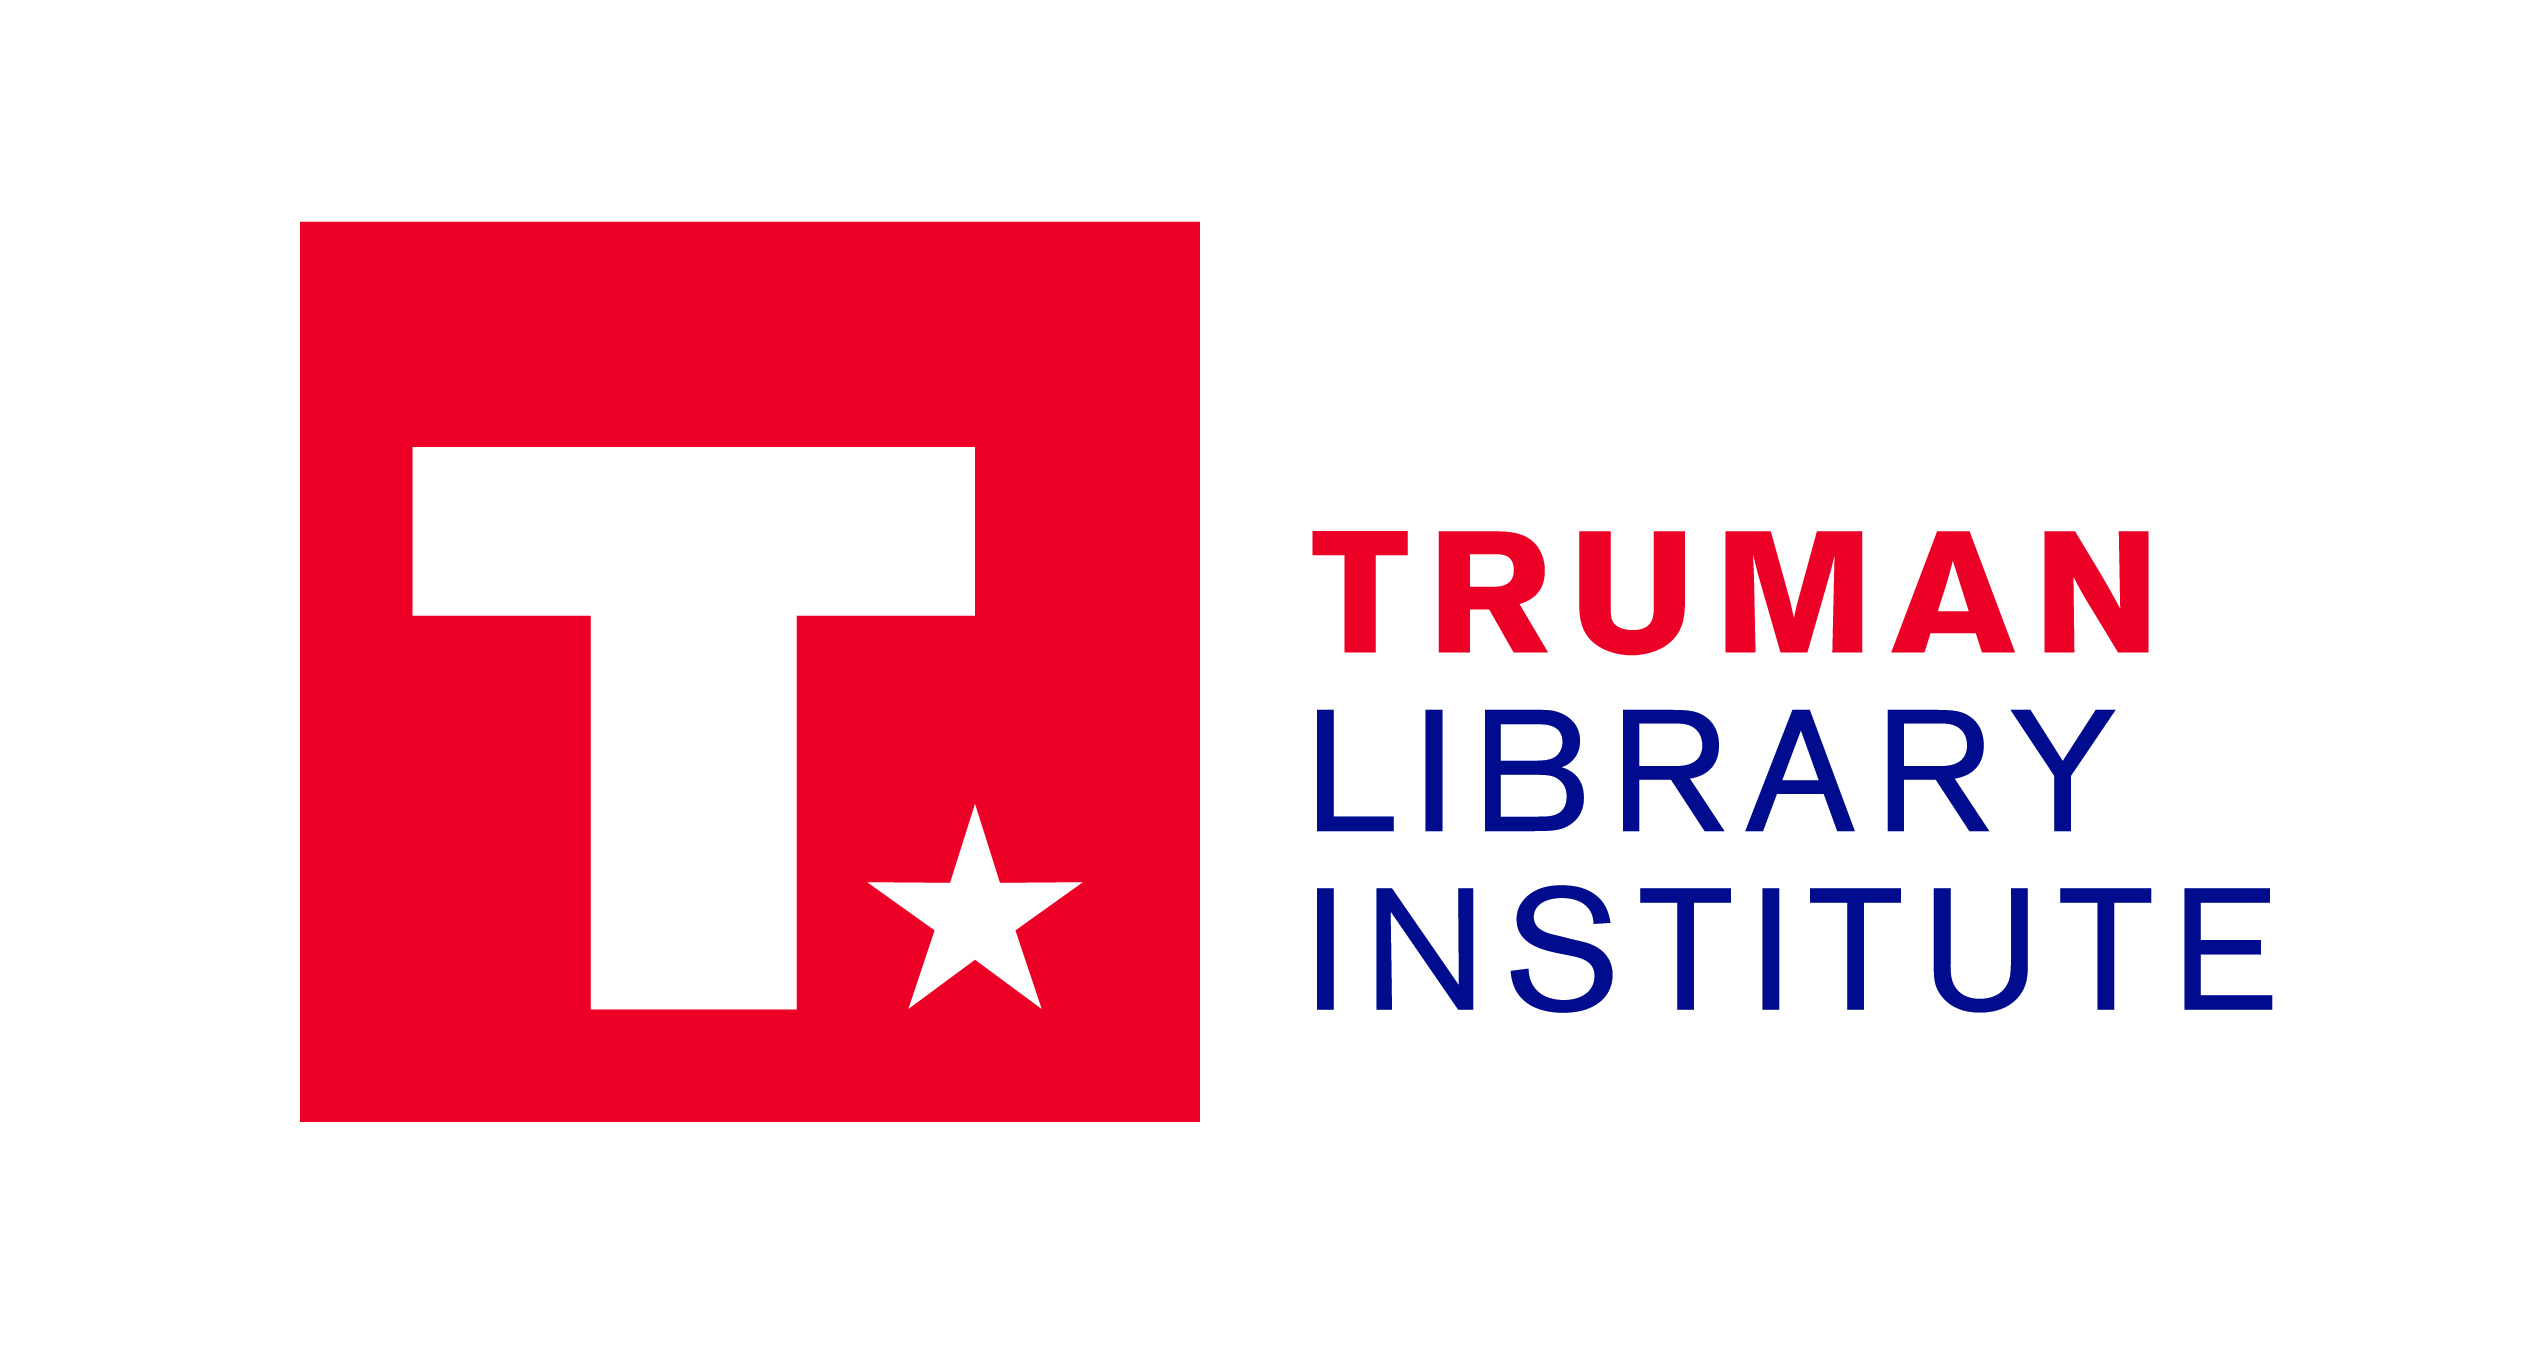 The Truman Library Institute spearheaded the Truman Statue Campaign to fund, create and install the new Truman statue at the Capitol, raising over $400,000 from donors across the country.